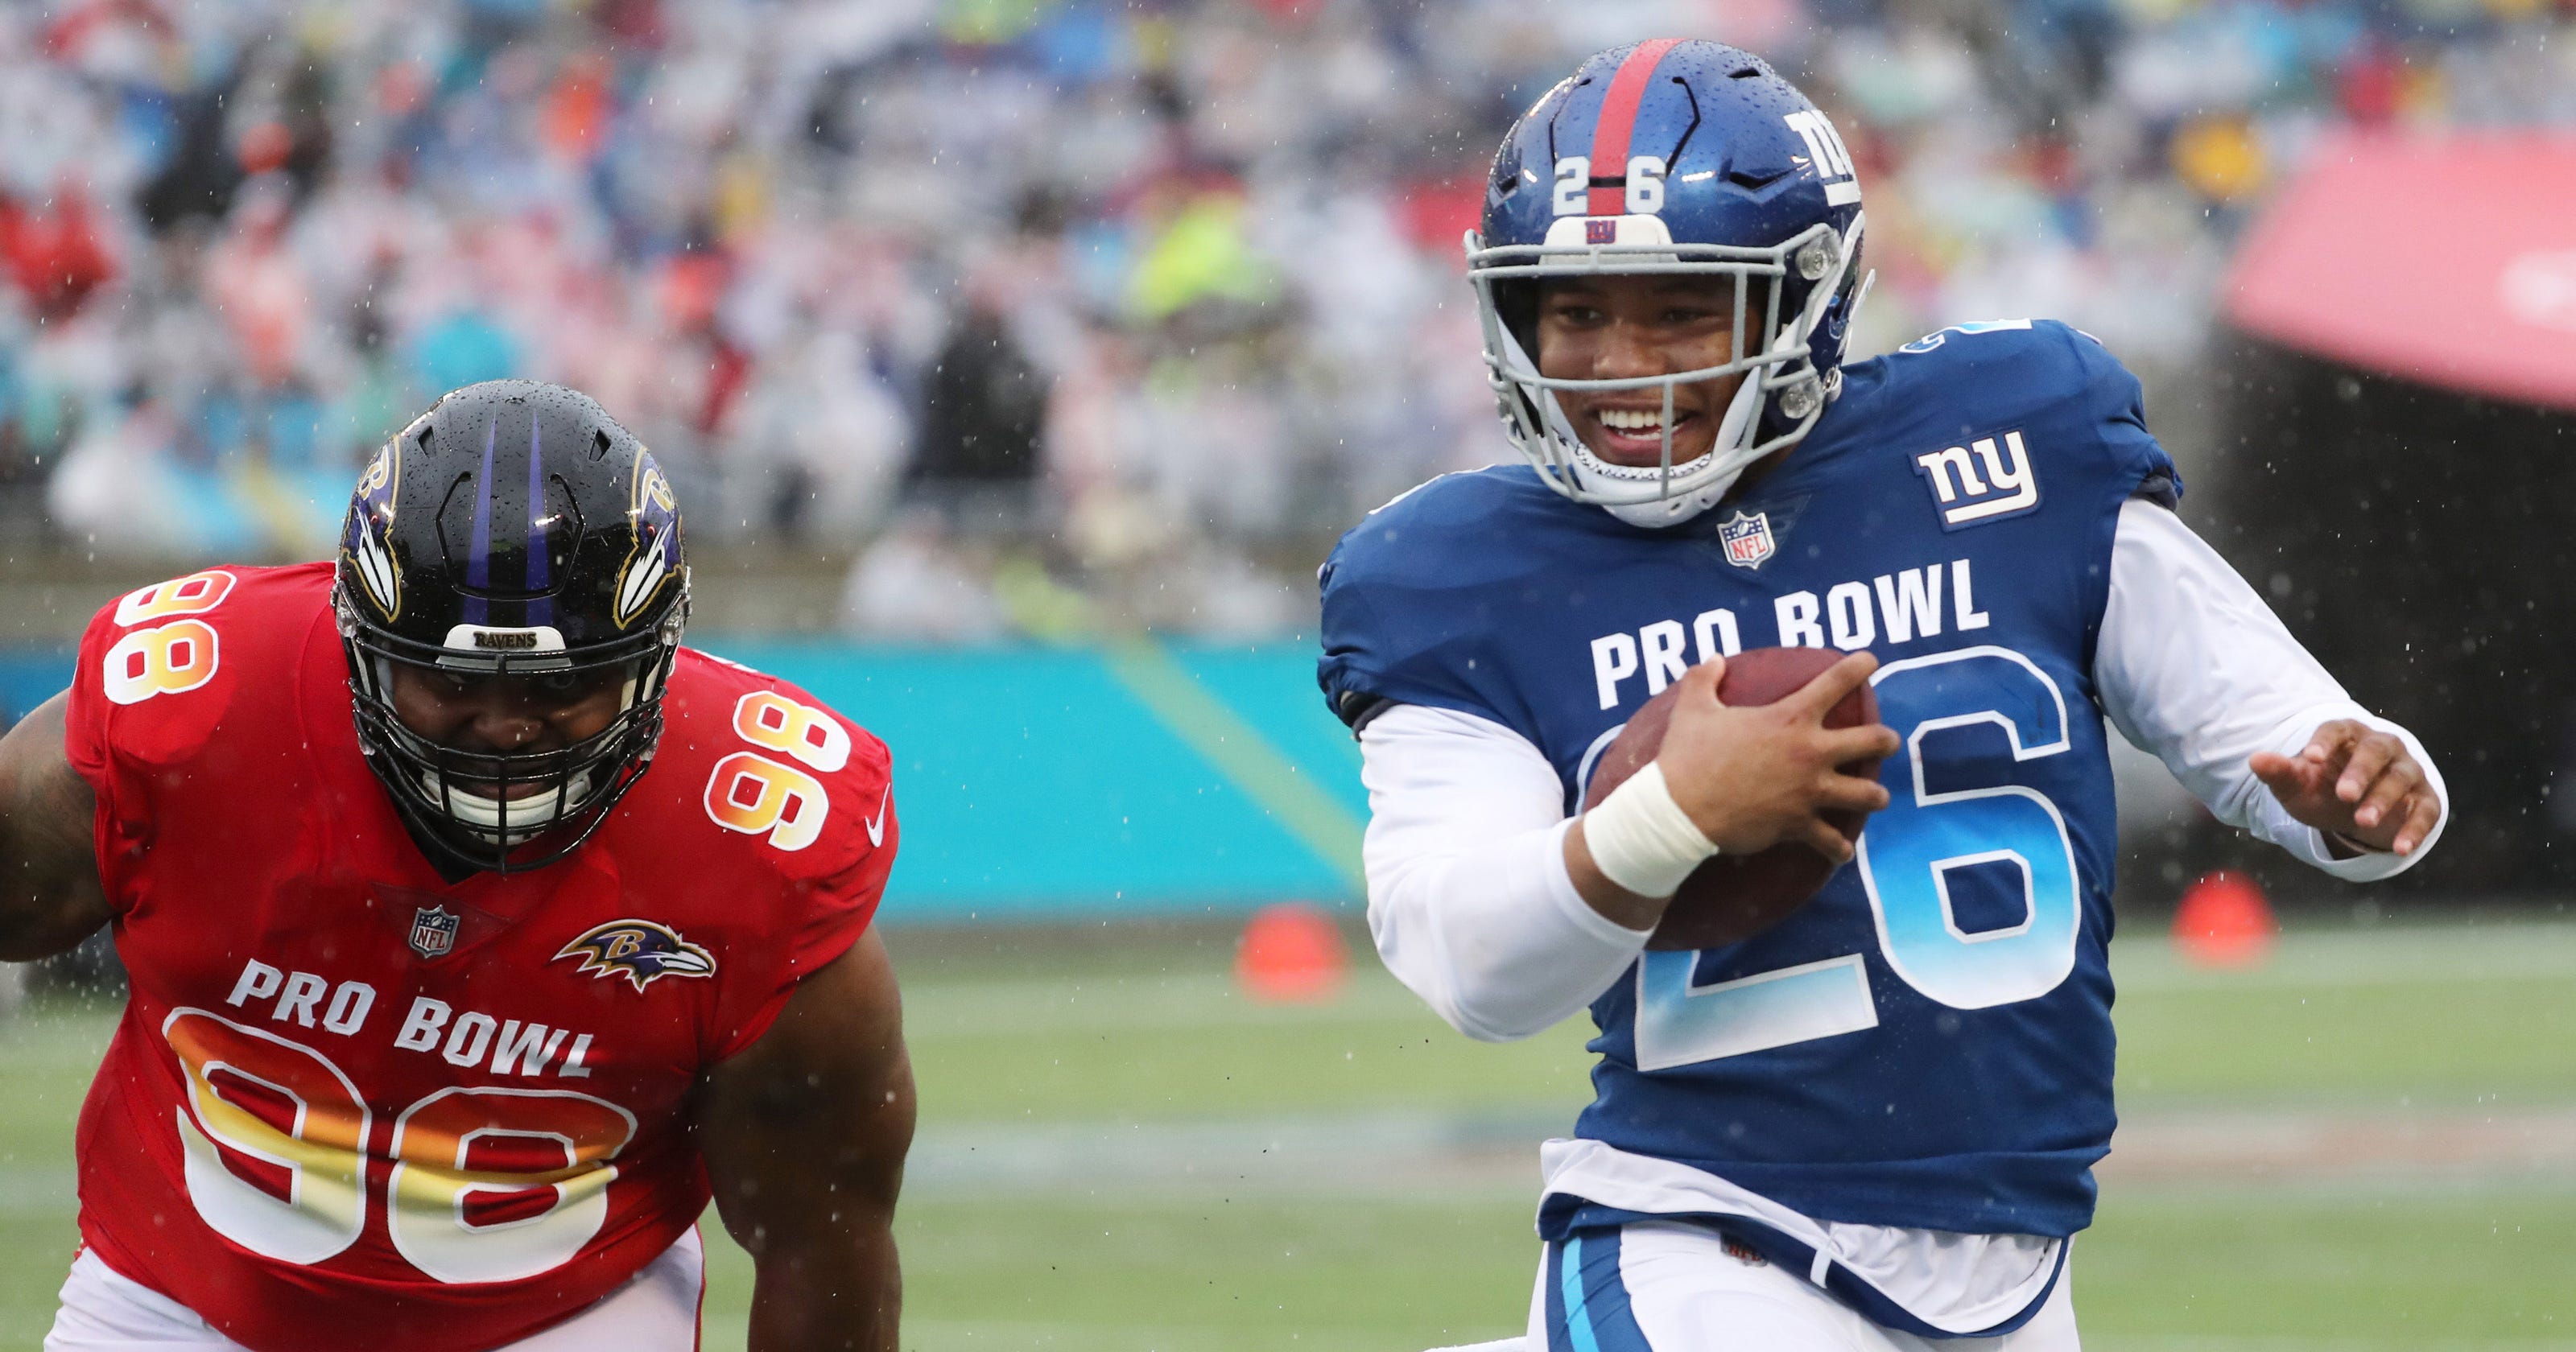 2019 Pro Bowl photos Best from AFC vs. NFC in Orlando